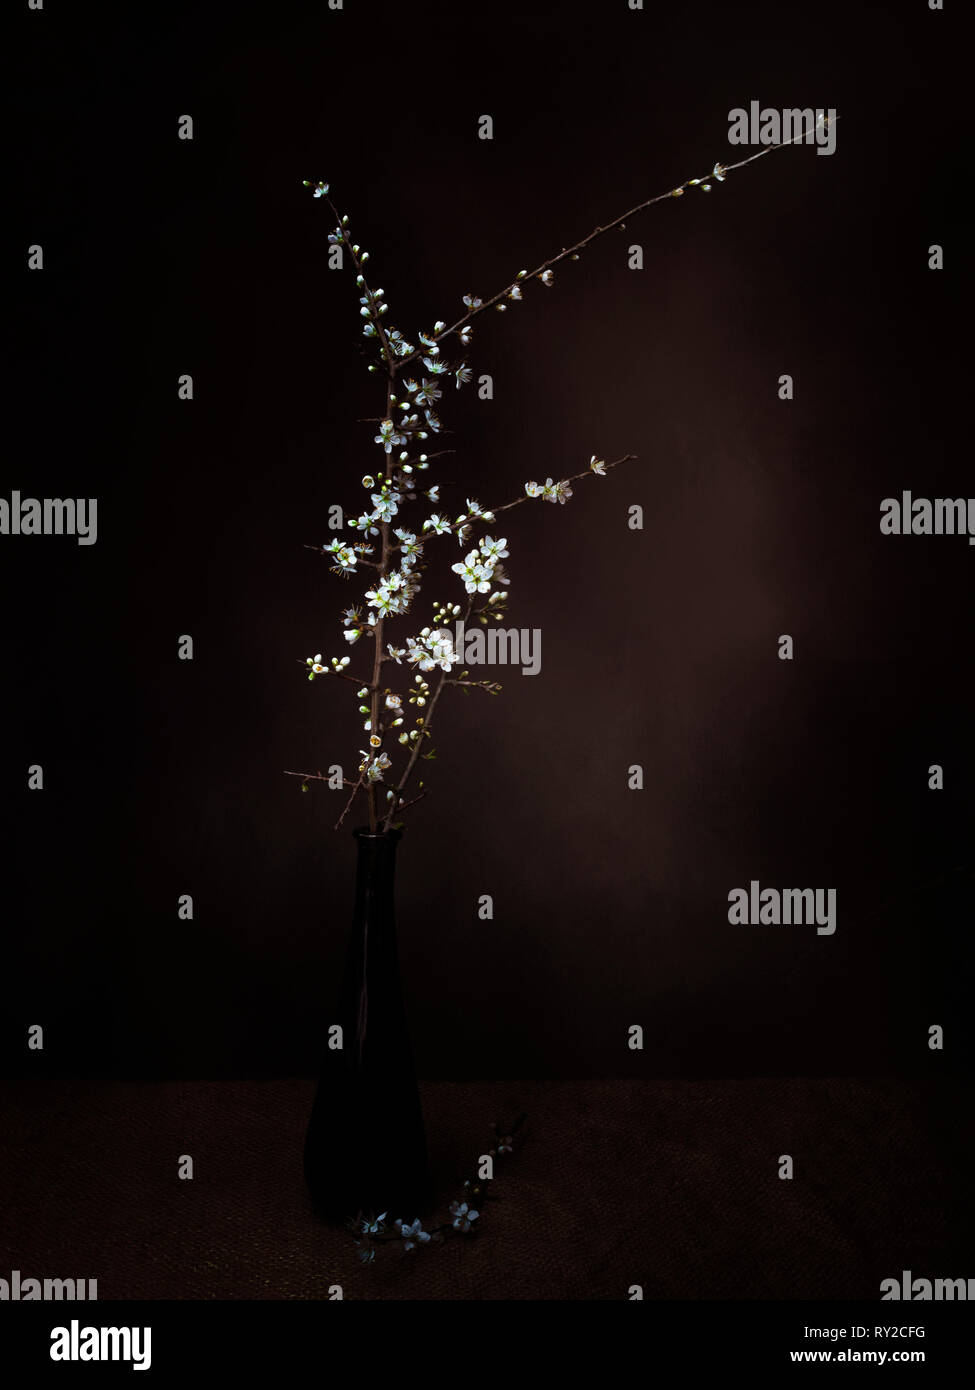 Prunus spinosa, blackthorn aka sloe blossom in vase, light painted and then textured. Delicate white spring flowers, nature in art. Stock Photo